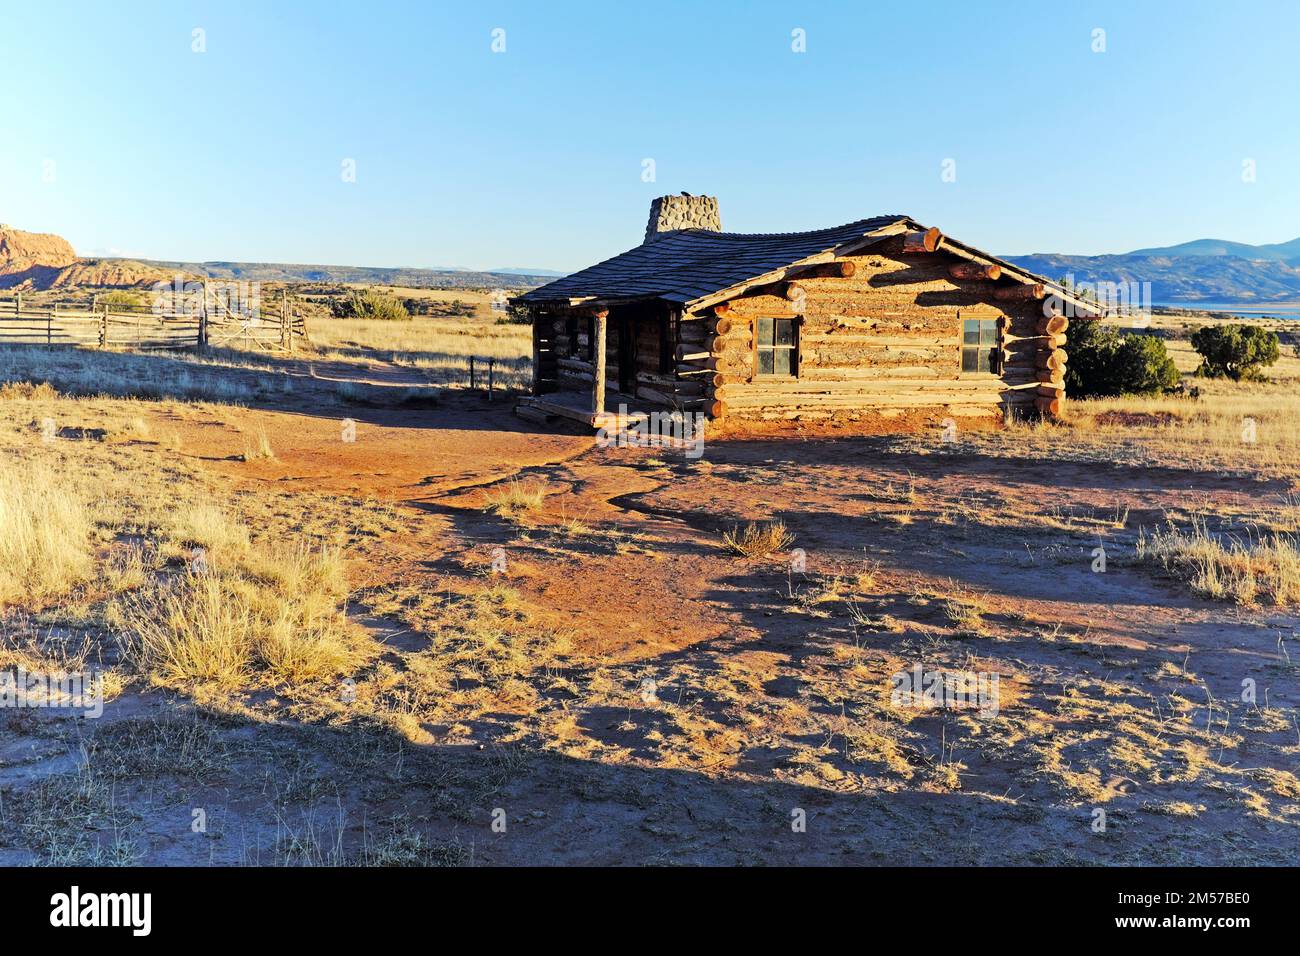 Log cabin at sunset in the New Mexico landscape. Stock Photo